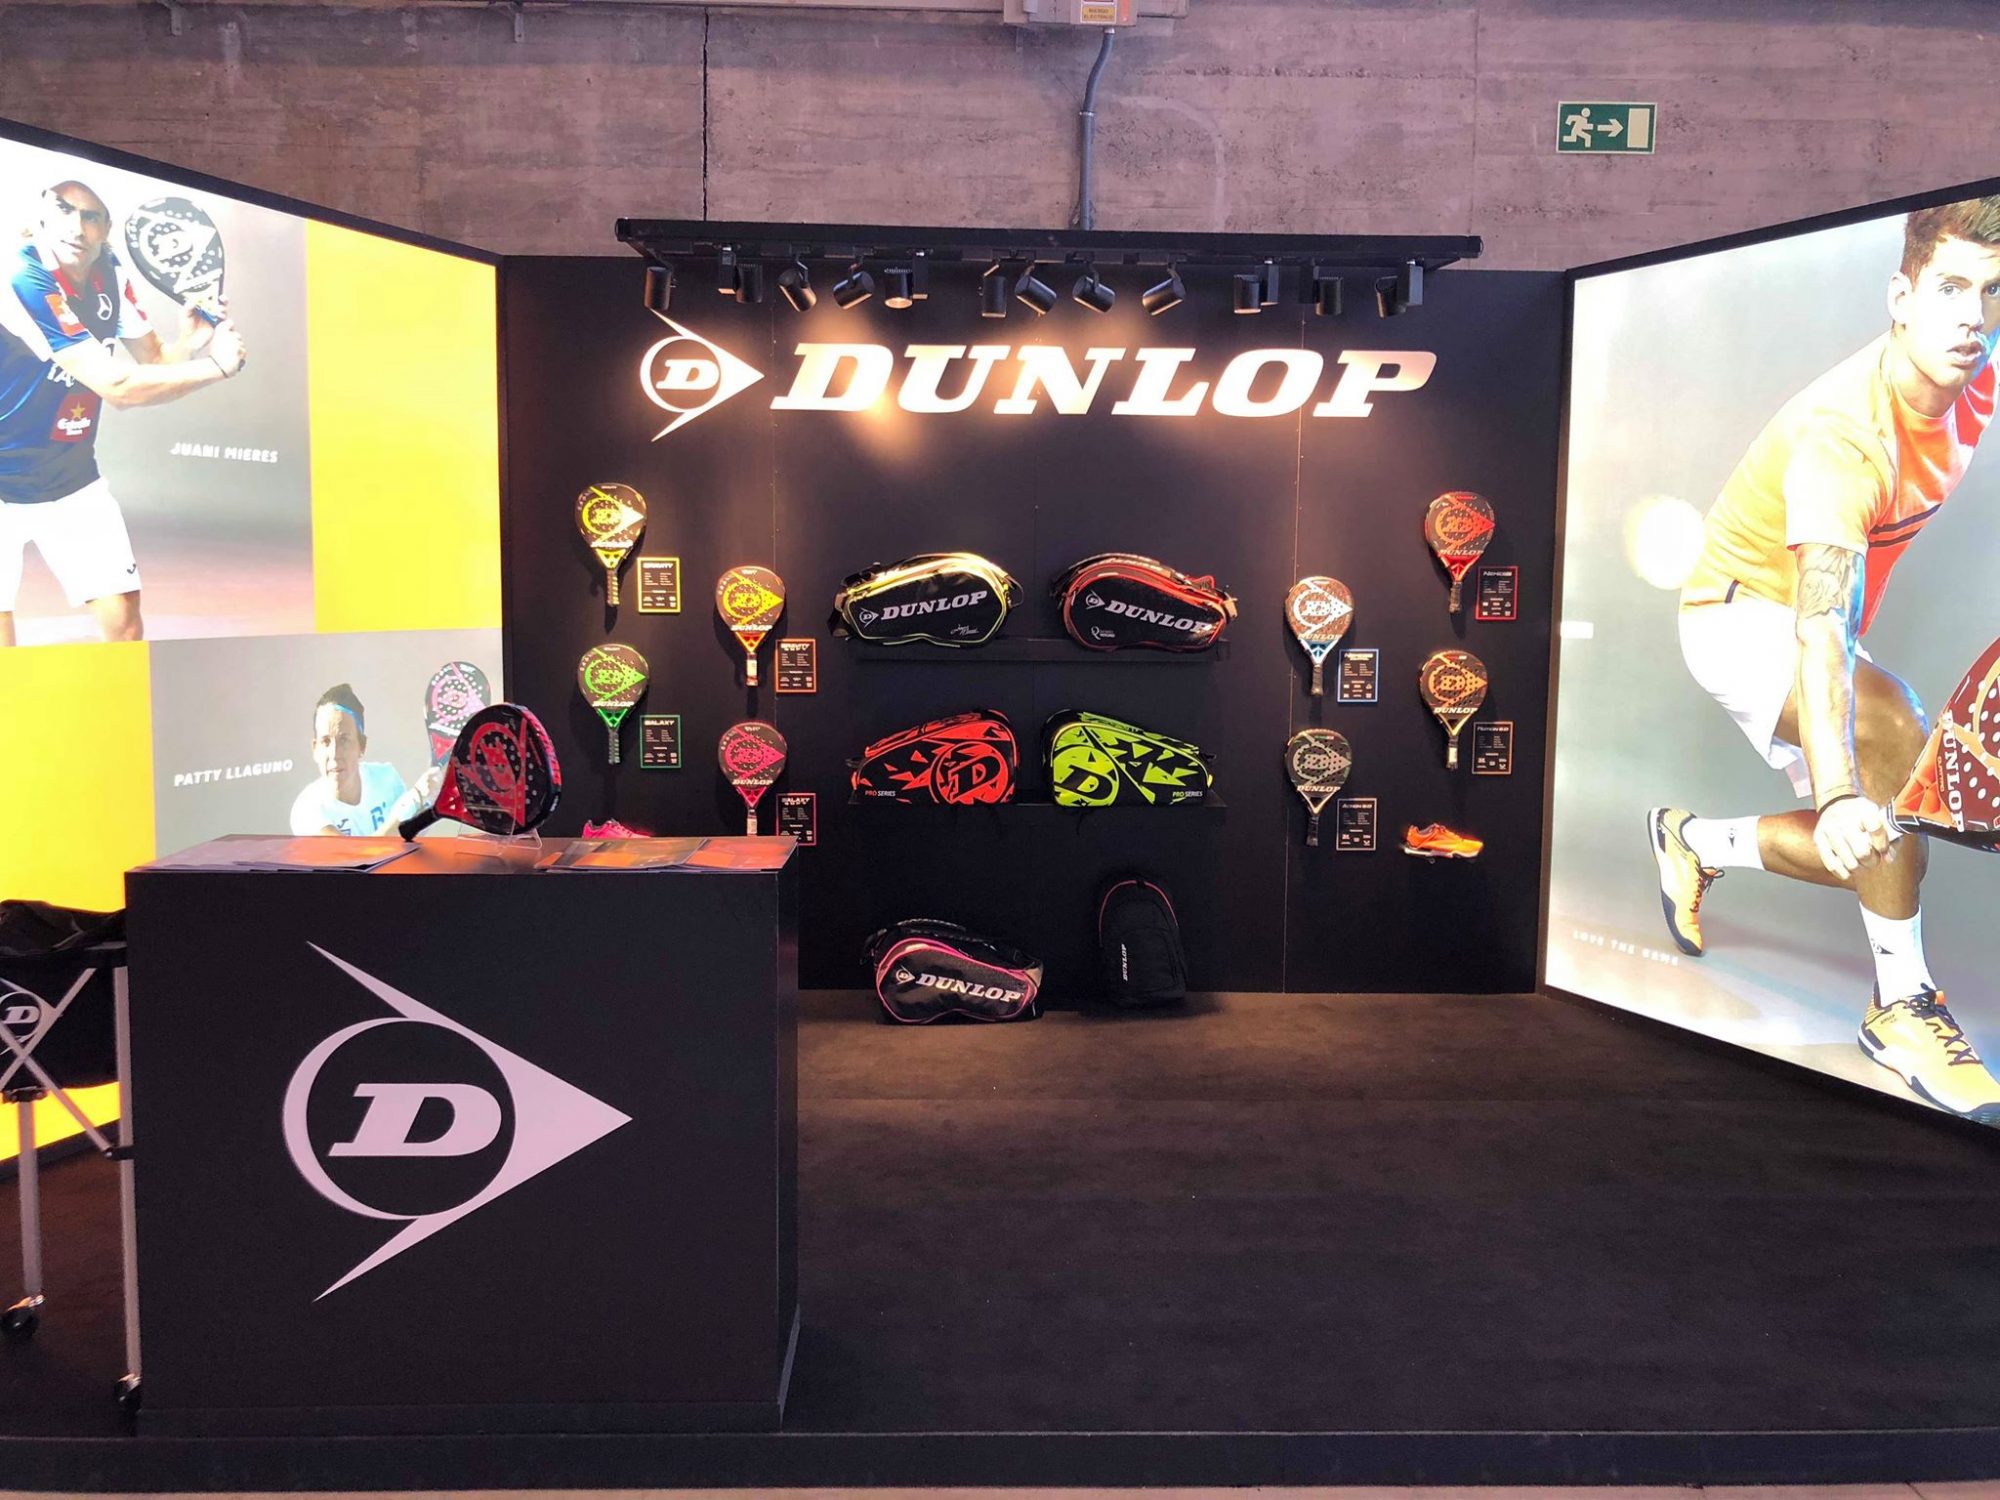 The Nemesis will be a bestseller at Dunlop Padel